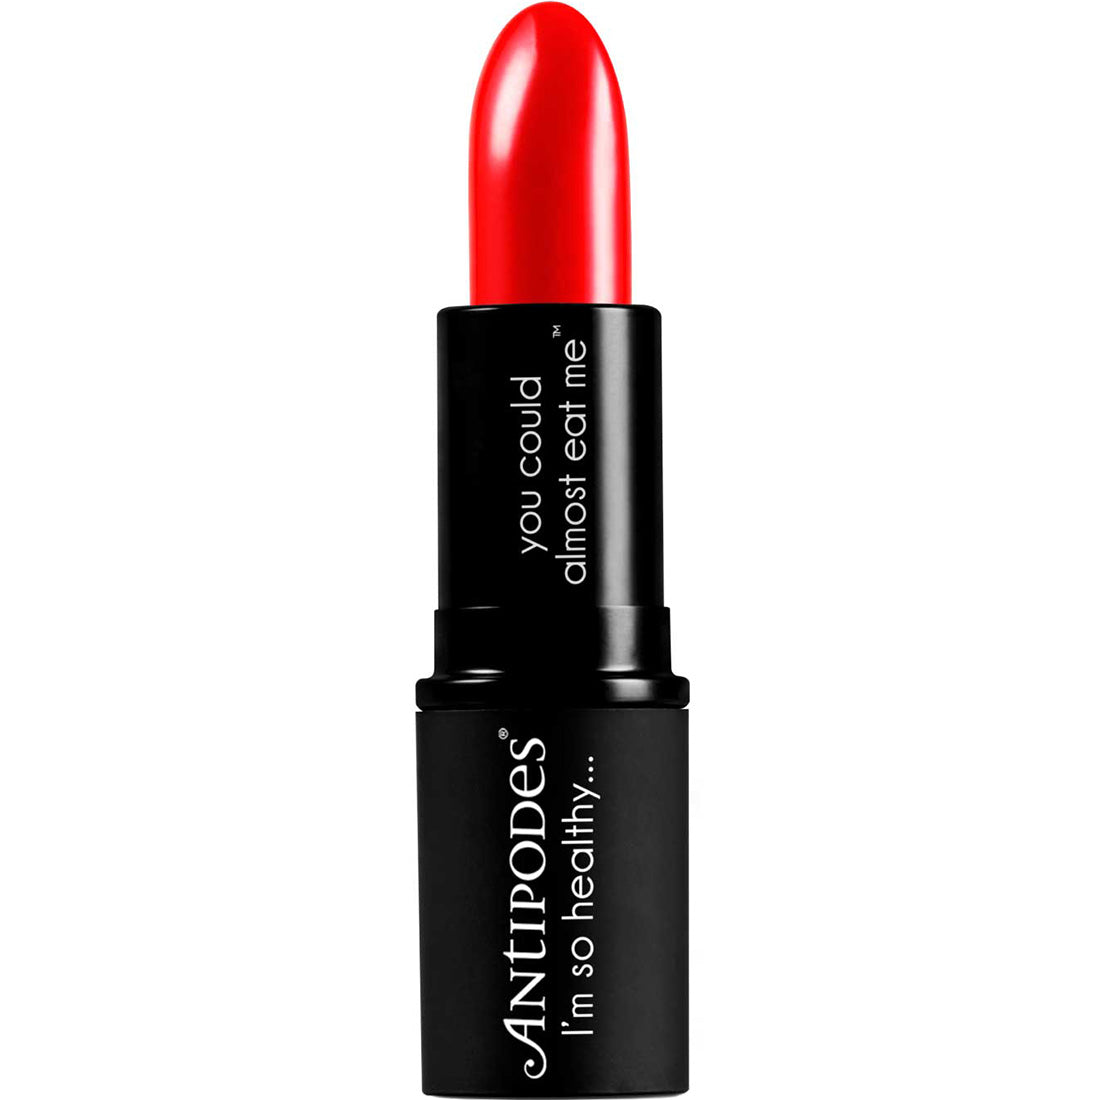 Antipodes Forest Berry Red Lipstick, 4g